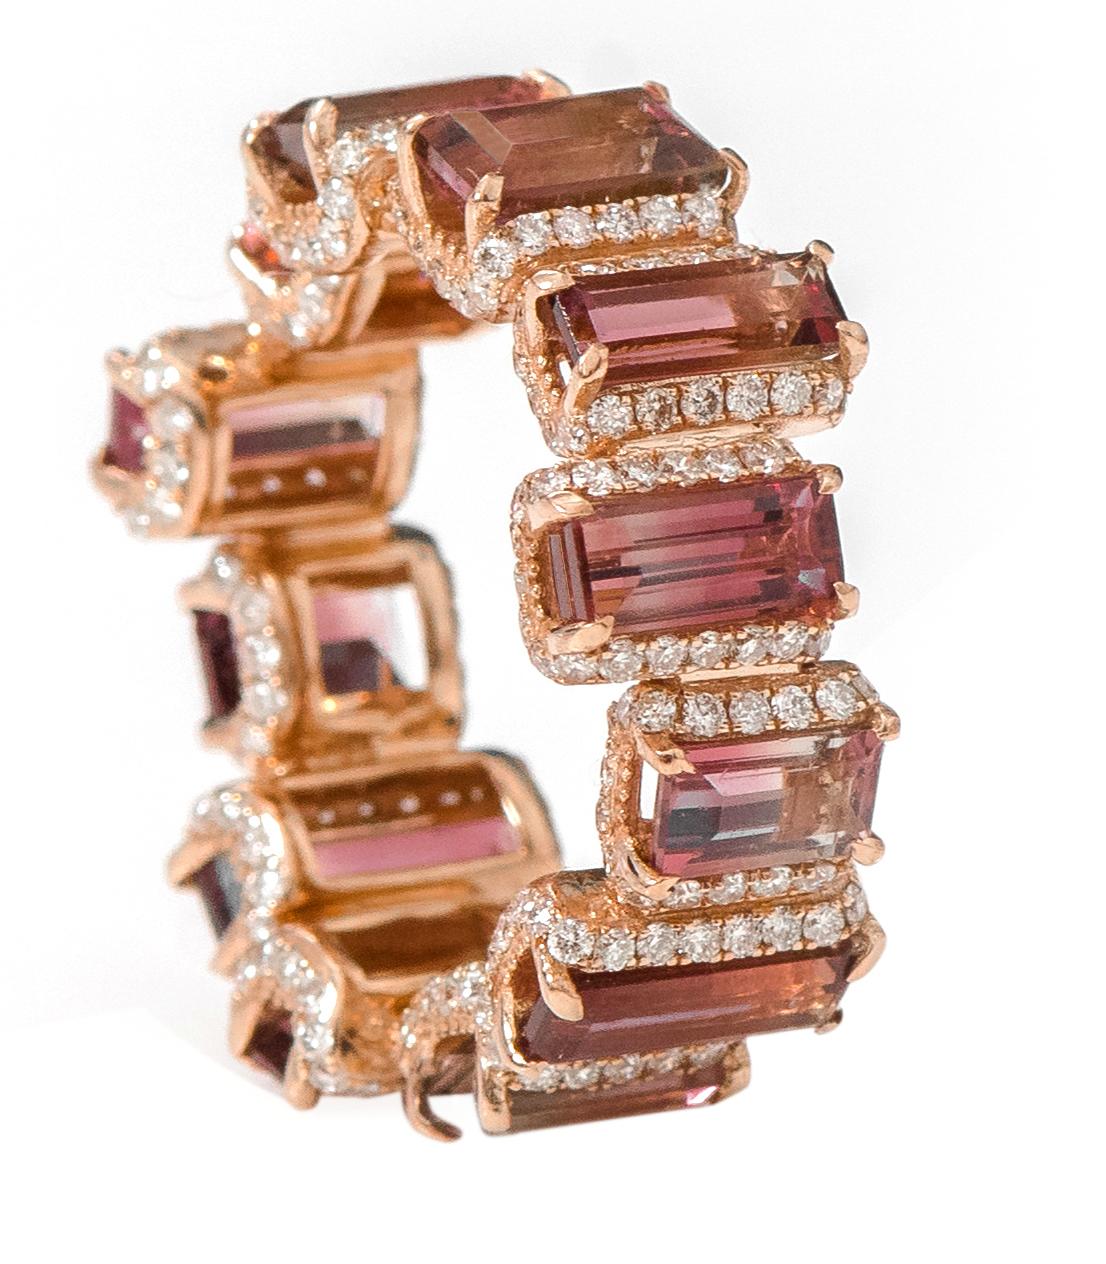 18 Karat Rose Gold 7.79 Carat Baguette-Cut Tourmaline and Diamond Eternity Band Ring

This dynamic fantasy rose pink-purple parti-color tourmaline and diamond band is incredulous. The solitaire horizontally placed baguette-emerald cut tourmaline in